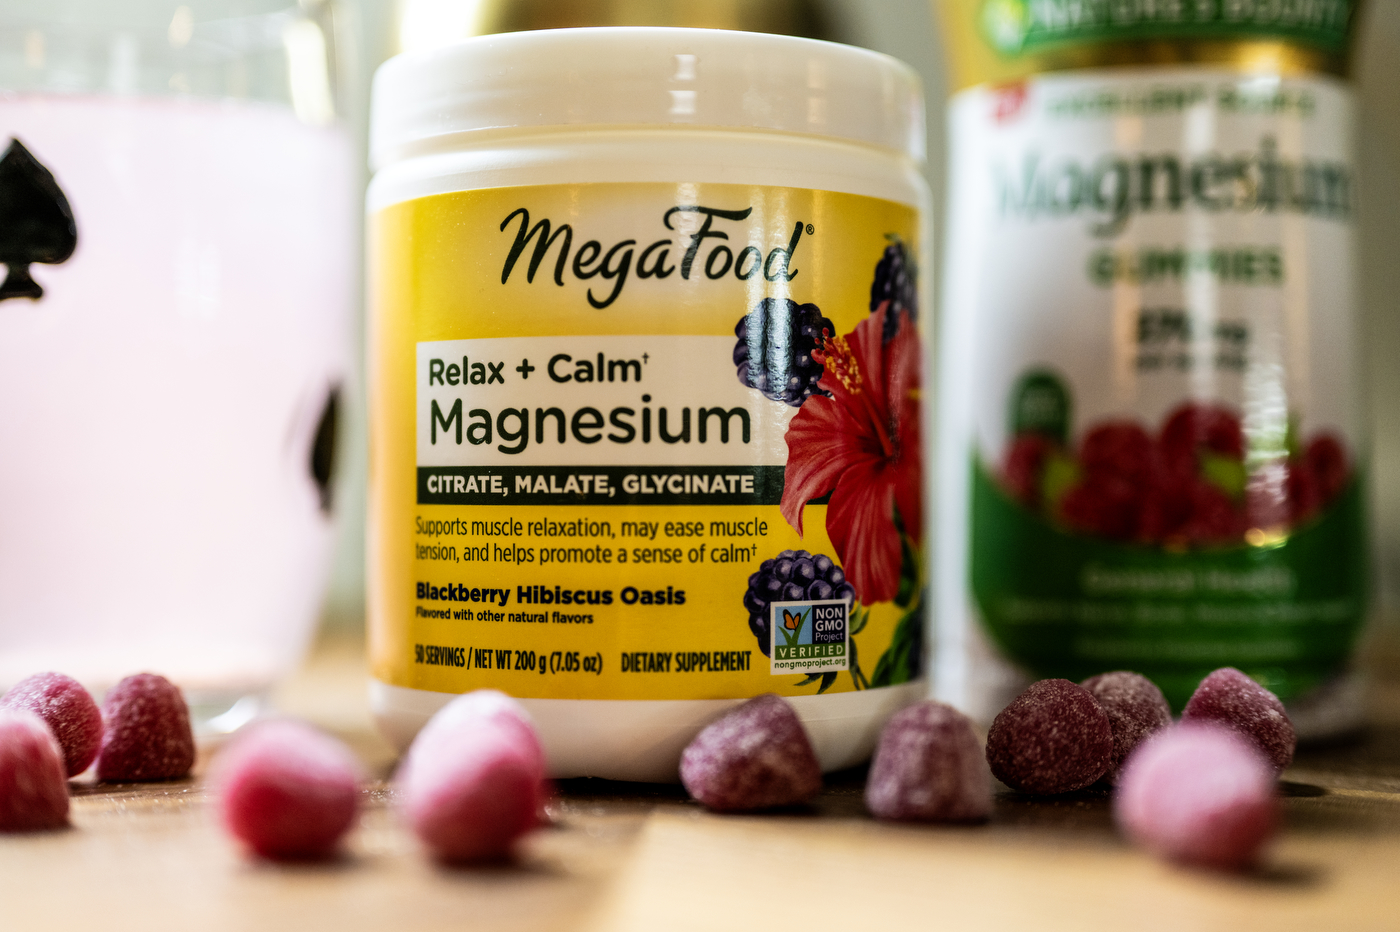 A container labeled "Relax + Calm Magnesium" is displayed in front of purple-colored gummies on a table.